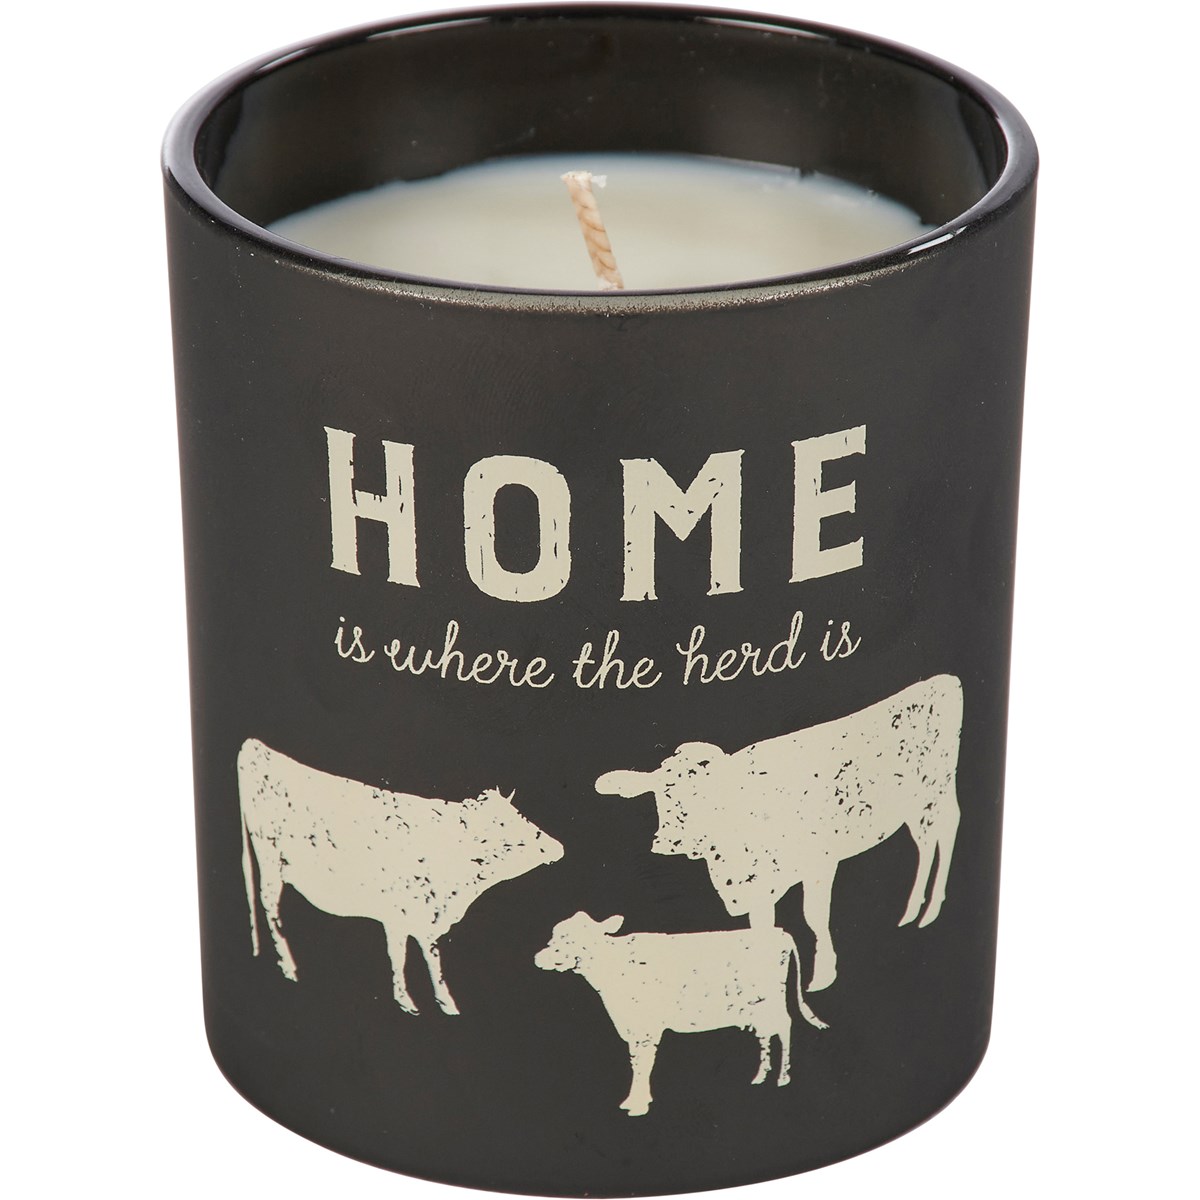 Home Is Where The Herd Is Jar Candle - Soy Wax, Glass, Cotton